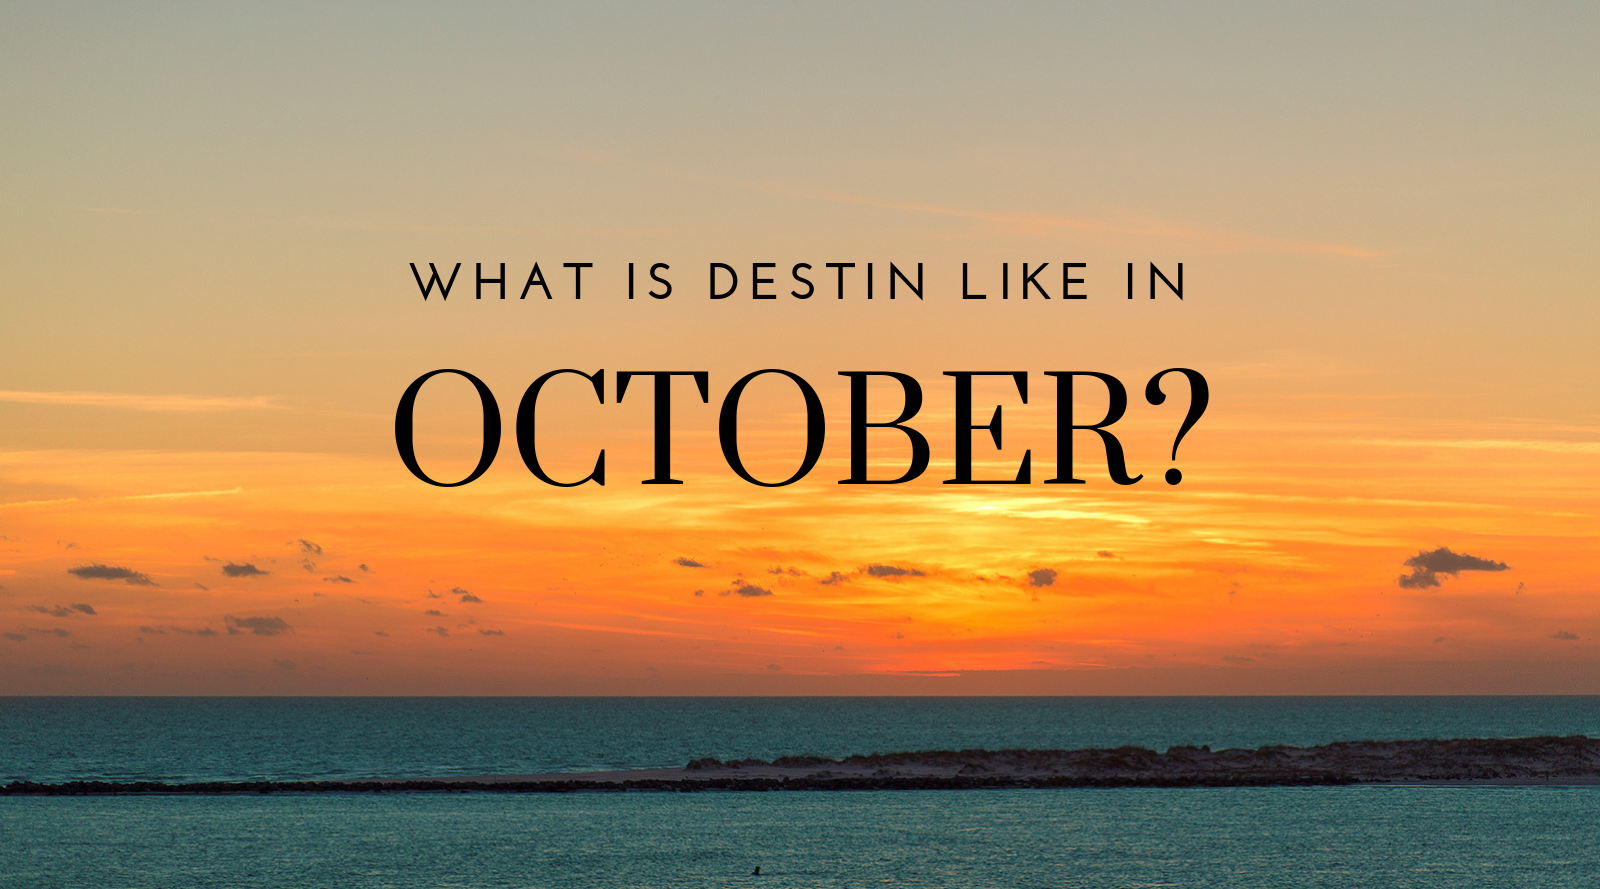 What is Destin Like in October?